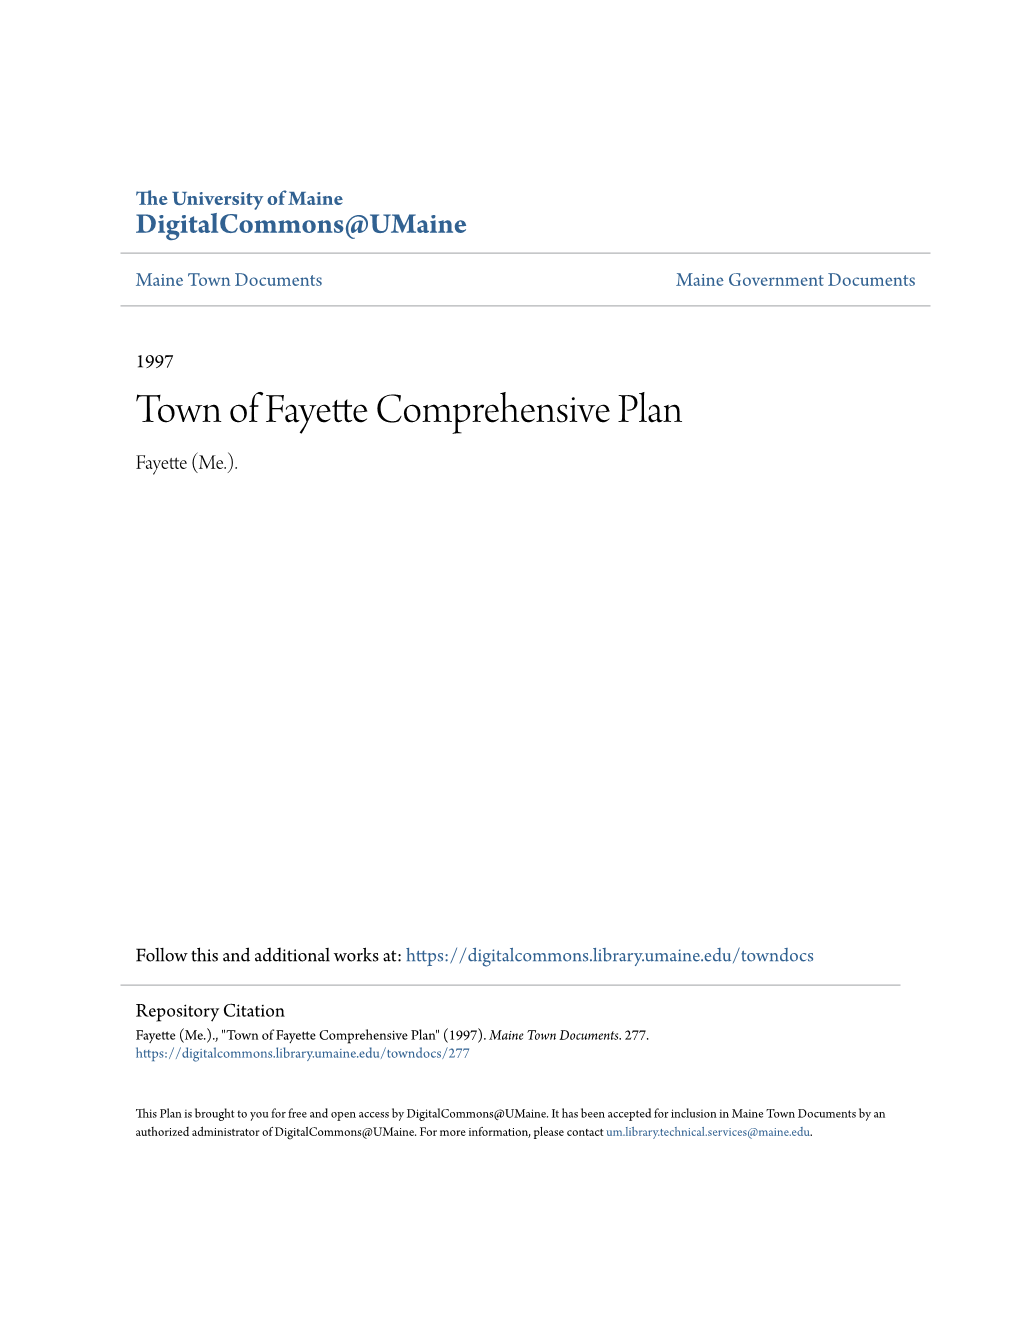 Town of Fayette Comprehensive Plan Fayette (Me.)